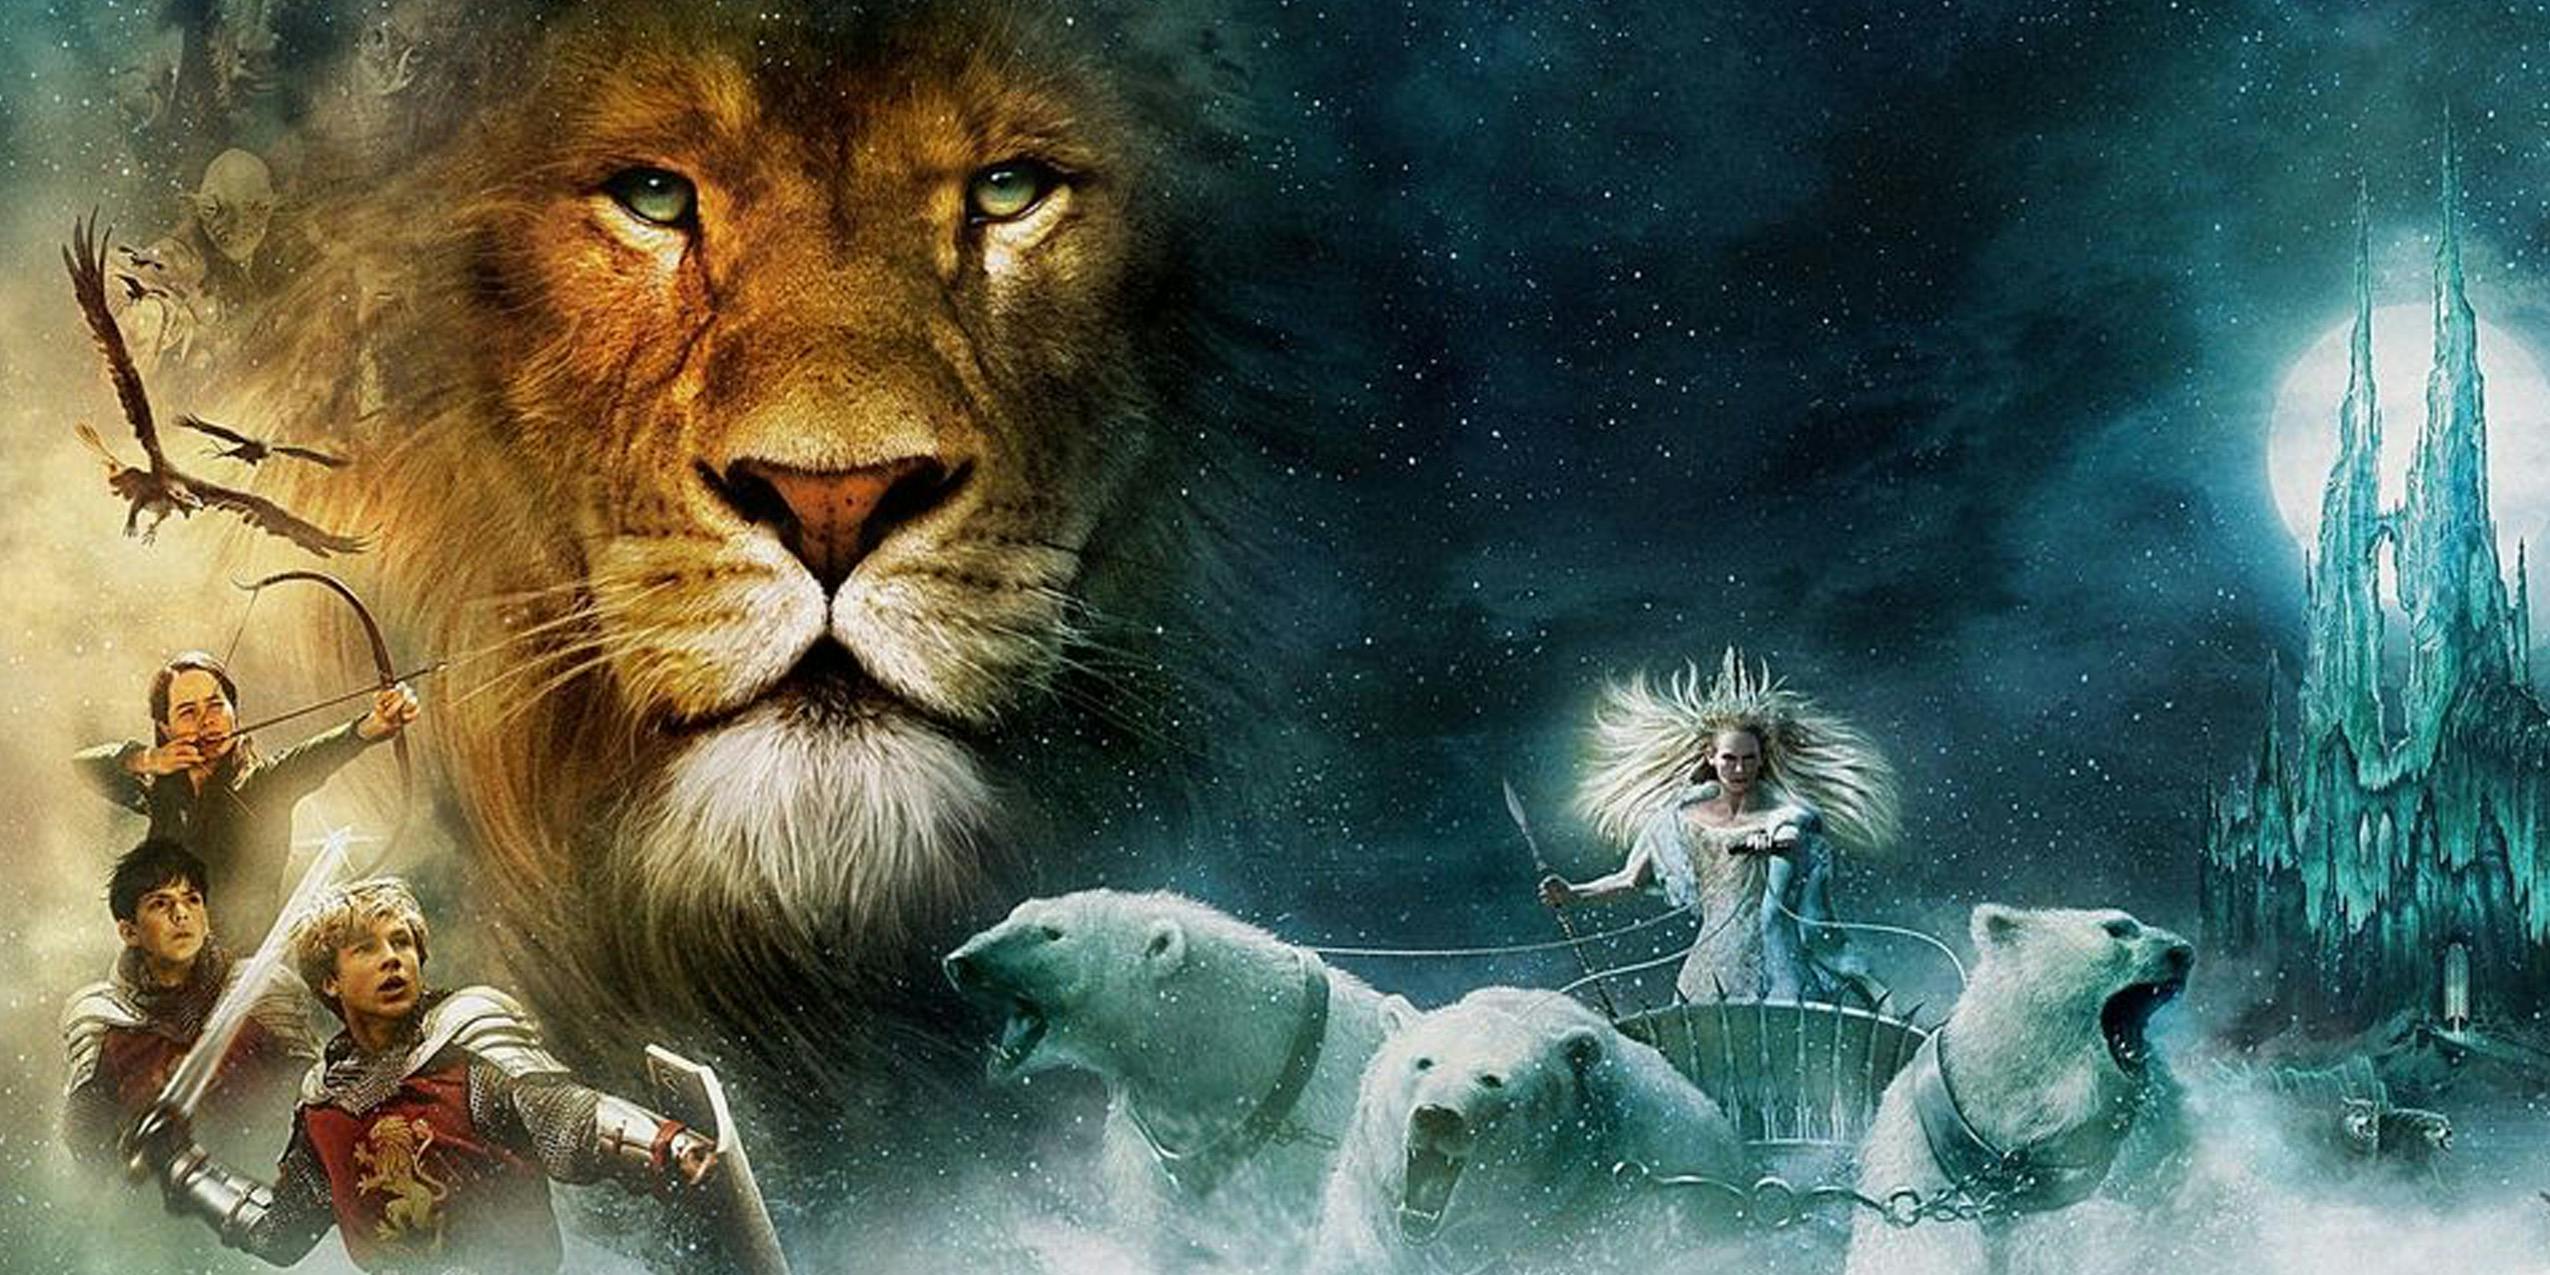 The Lion, the Witch, and the Wardrobe movie poster featuring Aslan the Lion and the Evil Witch.